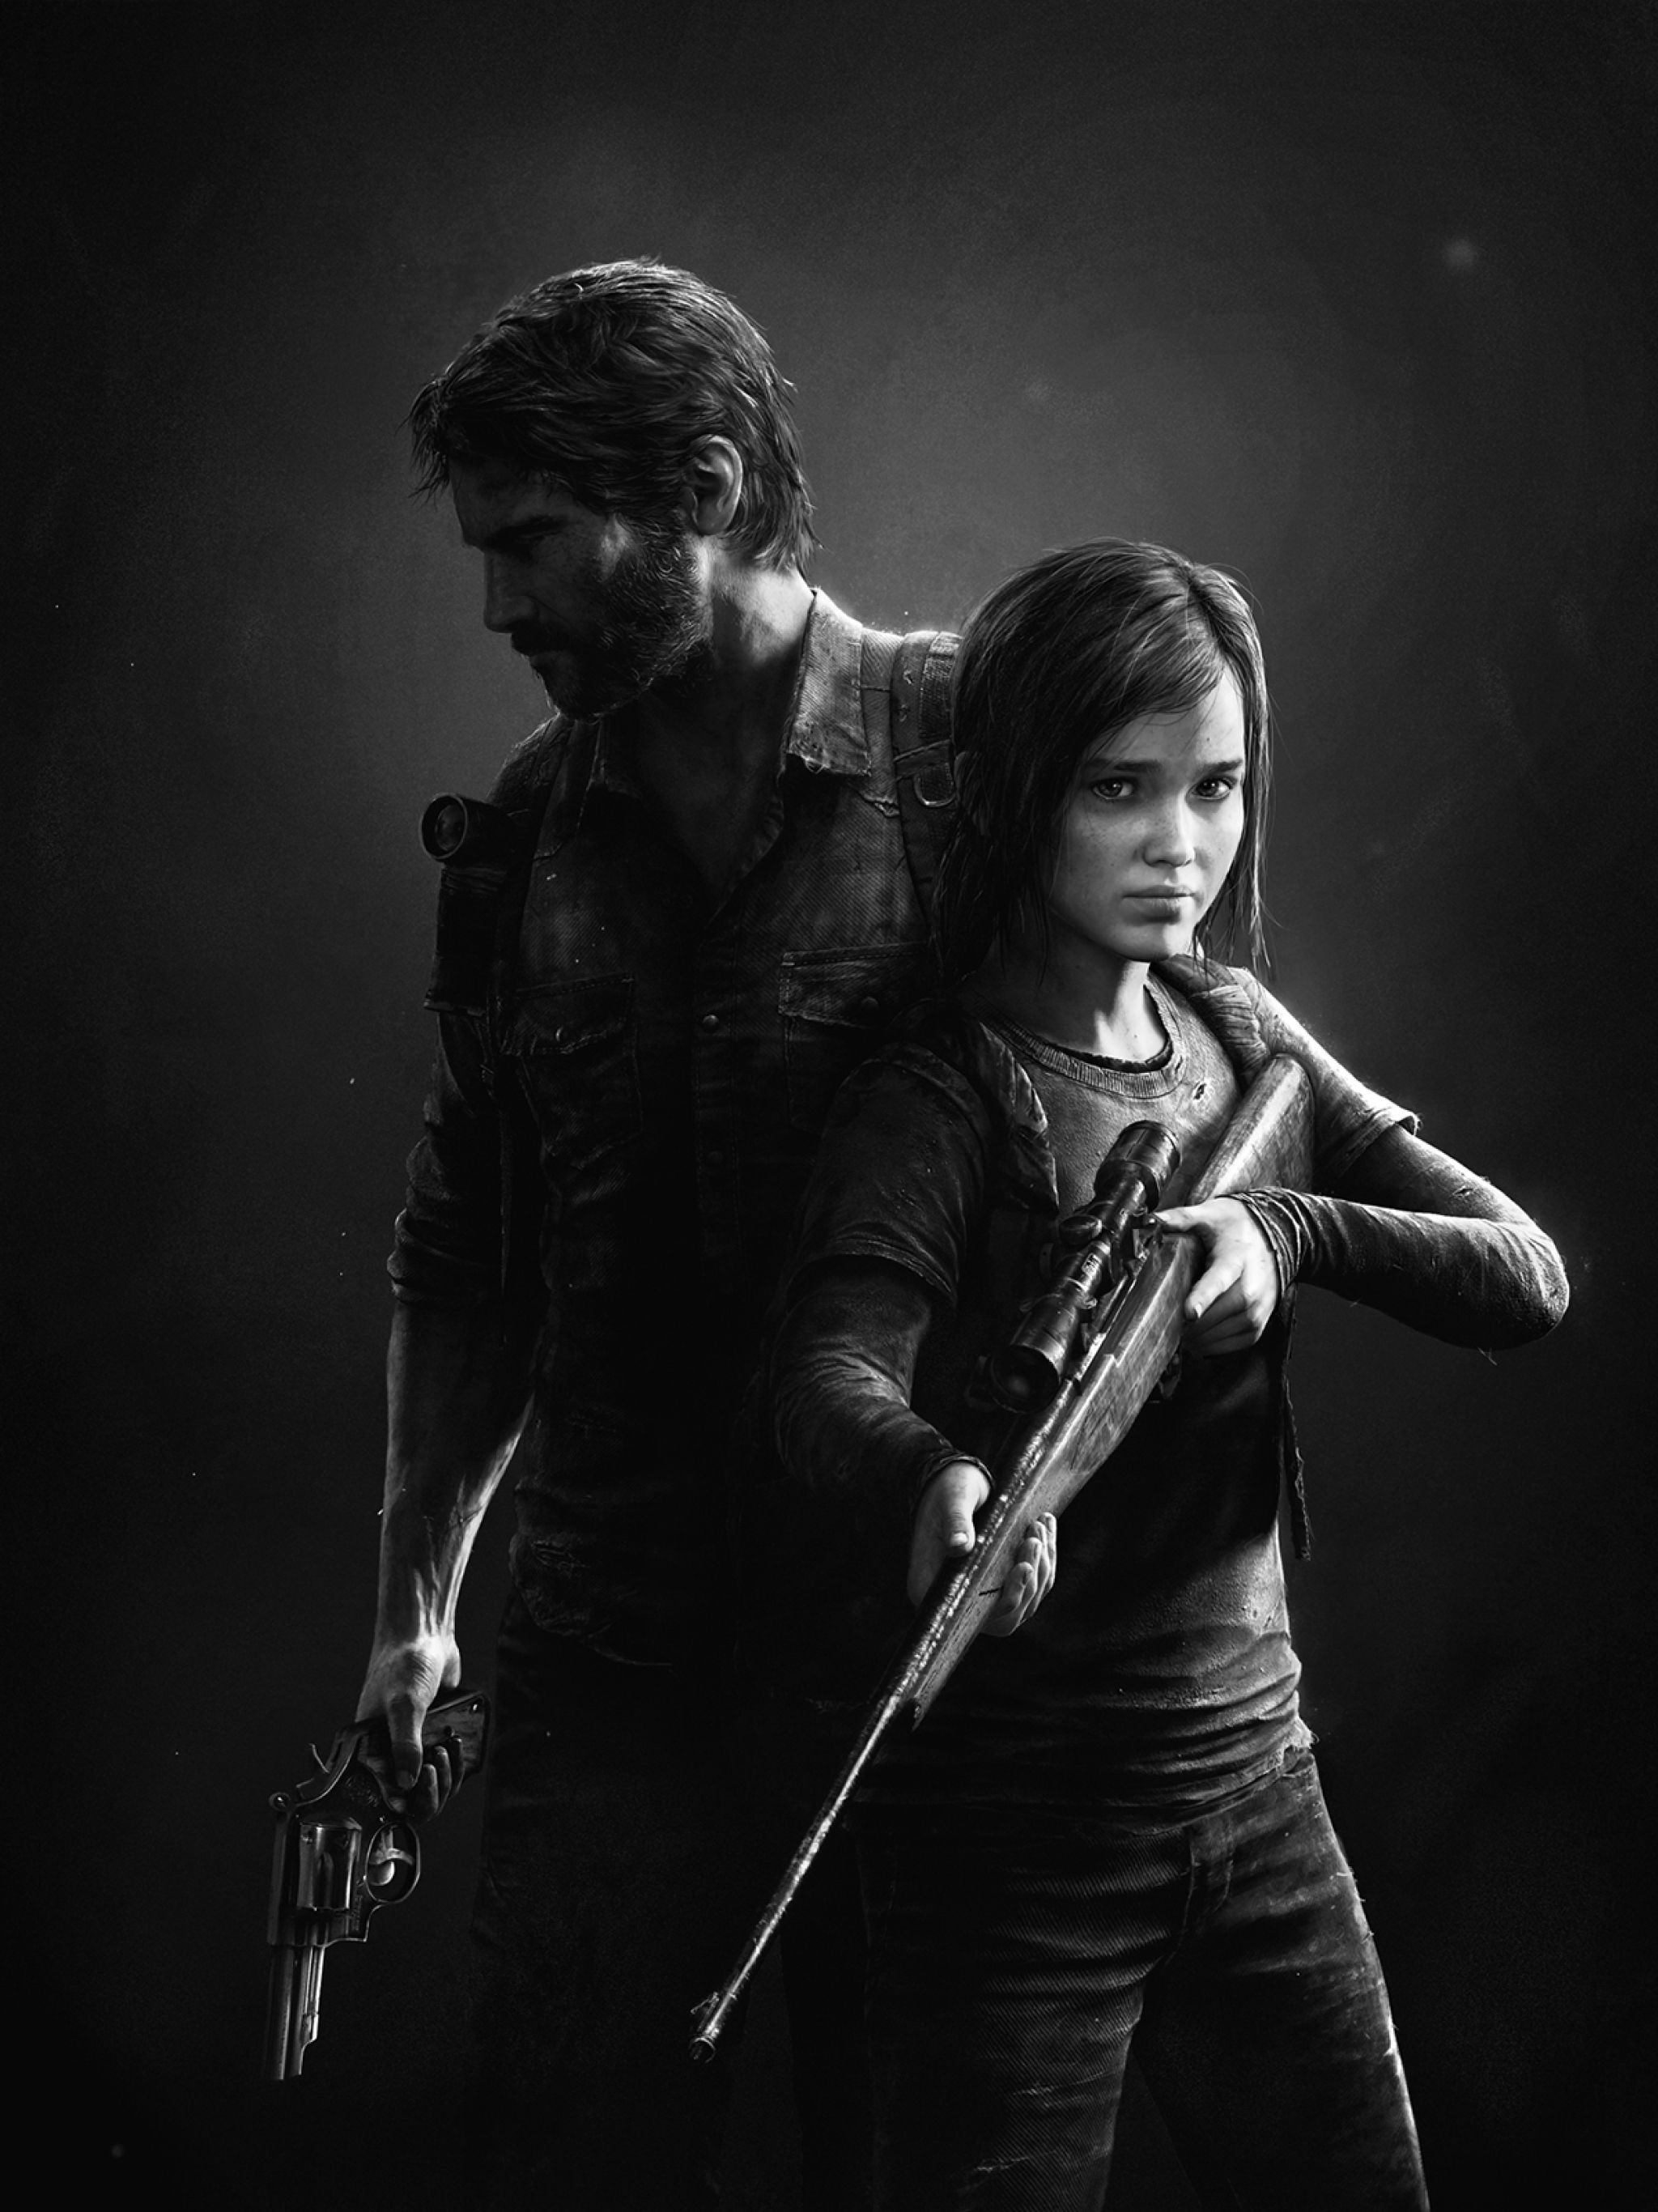 Gaming posters. The last of us. Одни из нас 2 Элли и Джоэл. Джоэл the last of us.